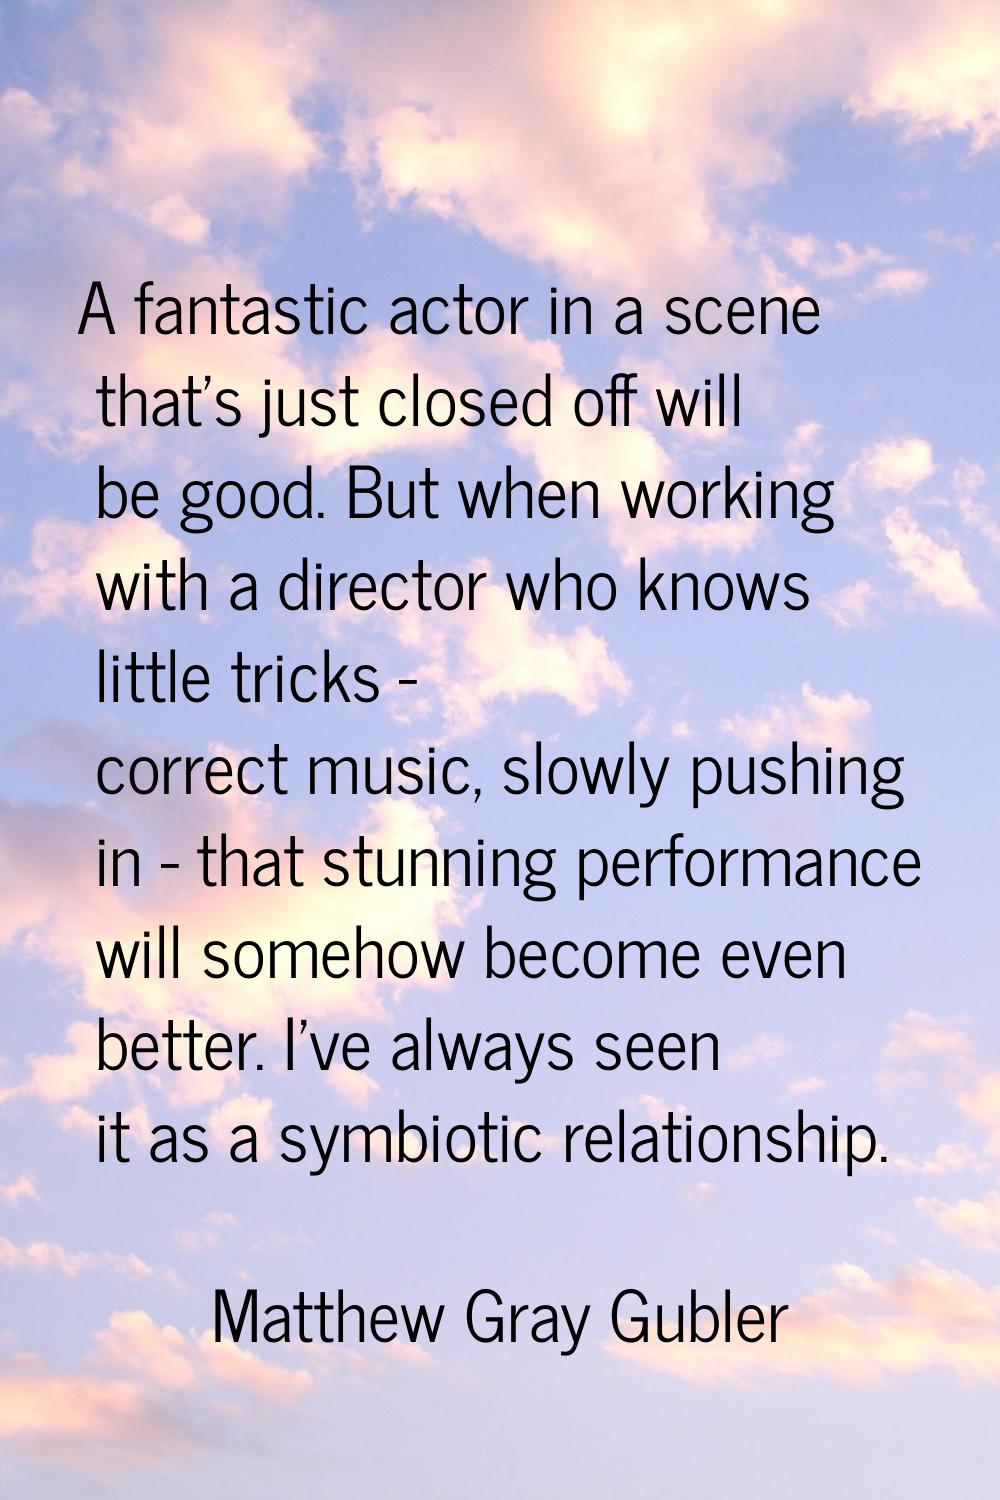 A fantastic actor in a scene that's just closed off will be good. But when working with a director 